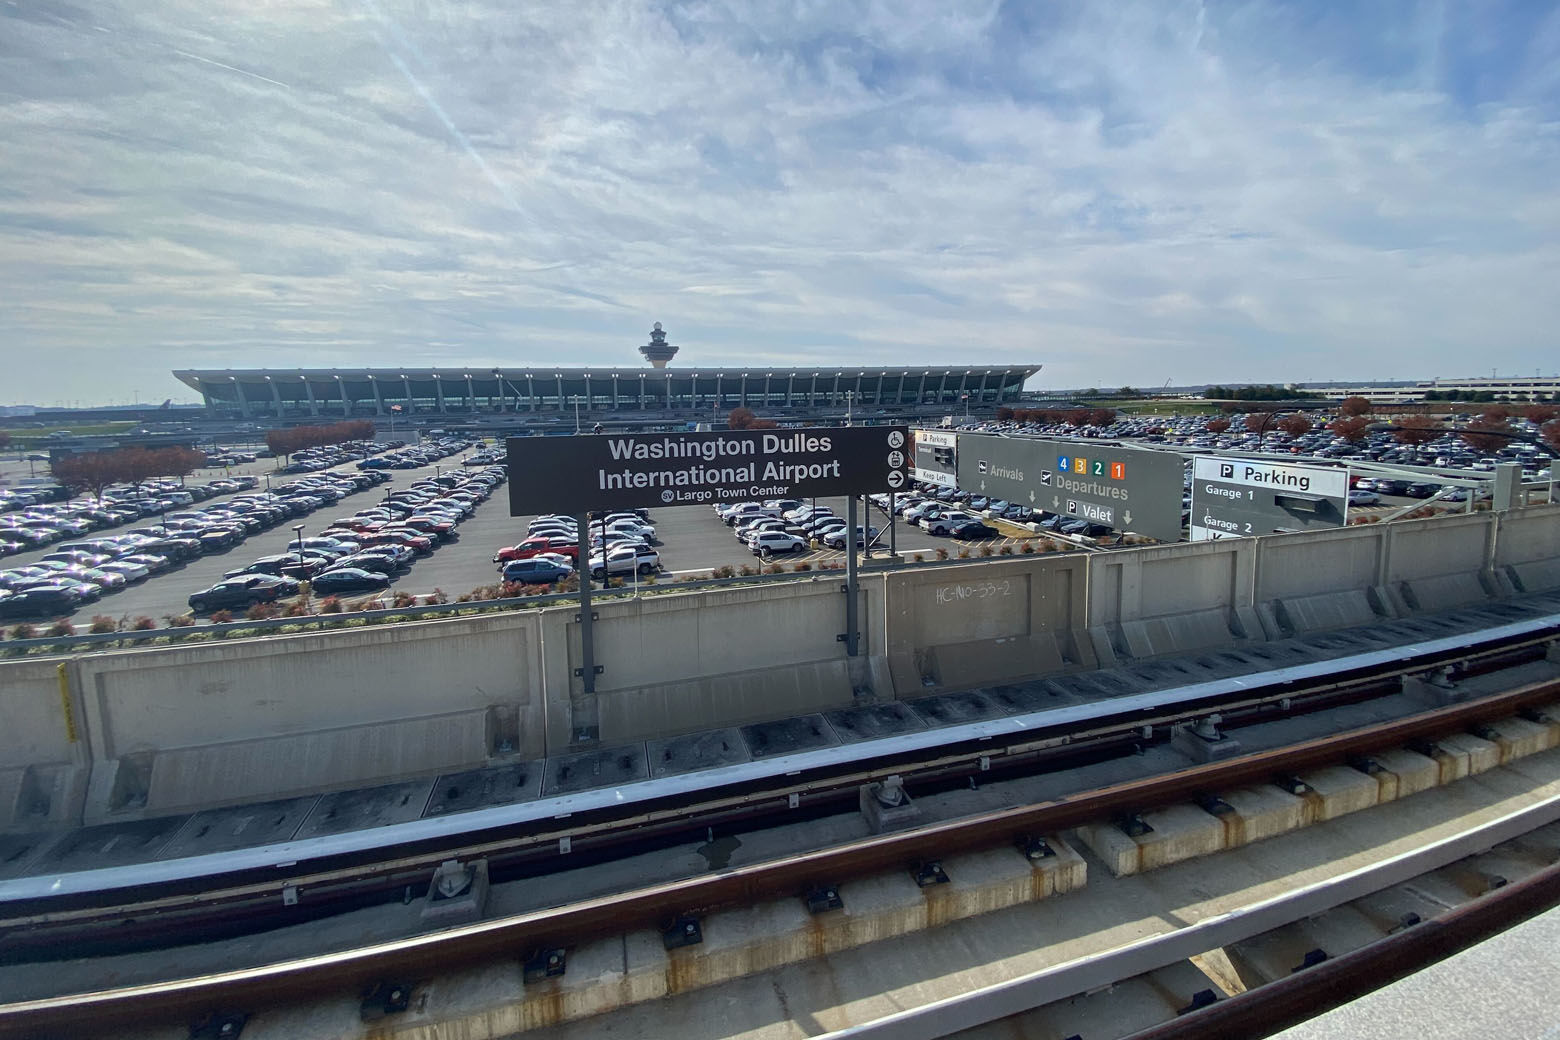 Data: 9% of travelers used Silver Line to Dulles International Airport